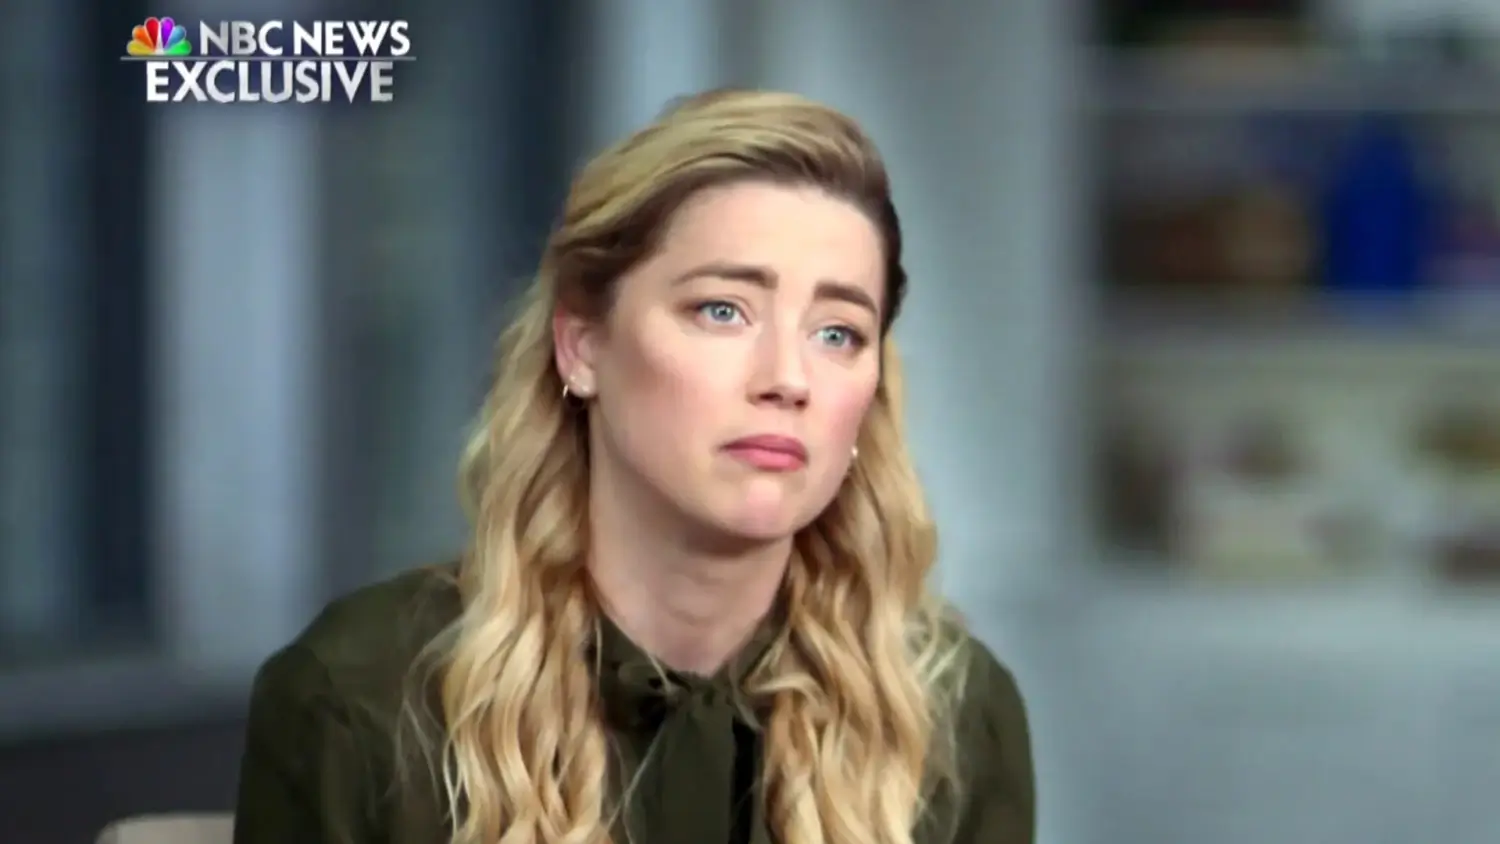 Amber Heard during her interview with NBC